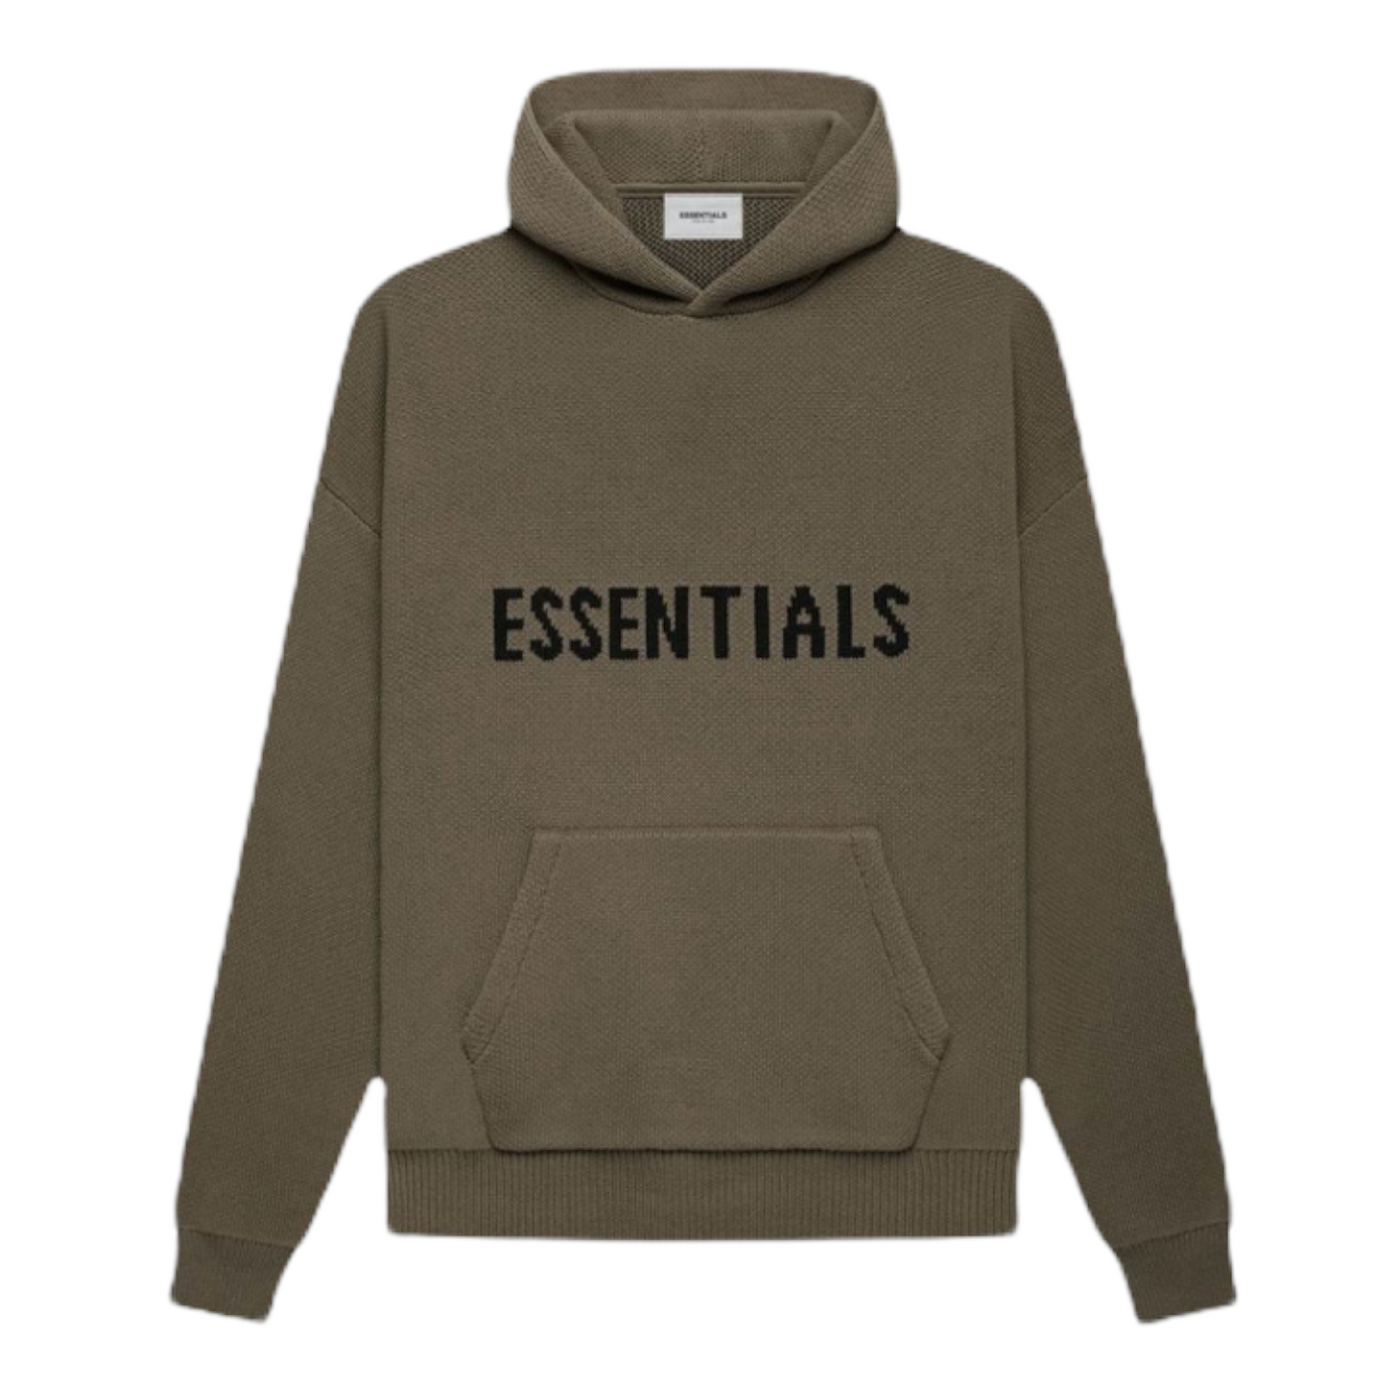 FEAR OF GOD ESSENTIALS KNIT HARVEST HOODIE